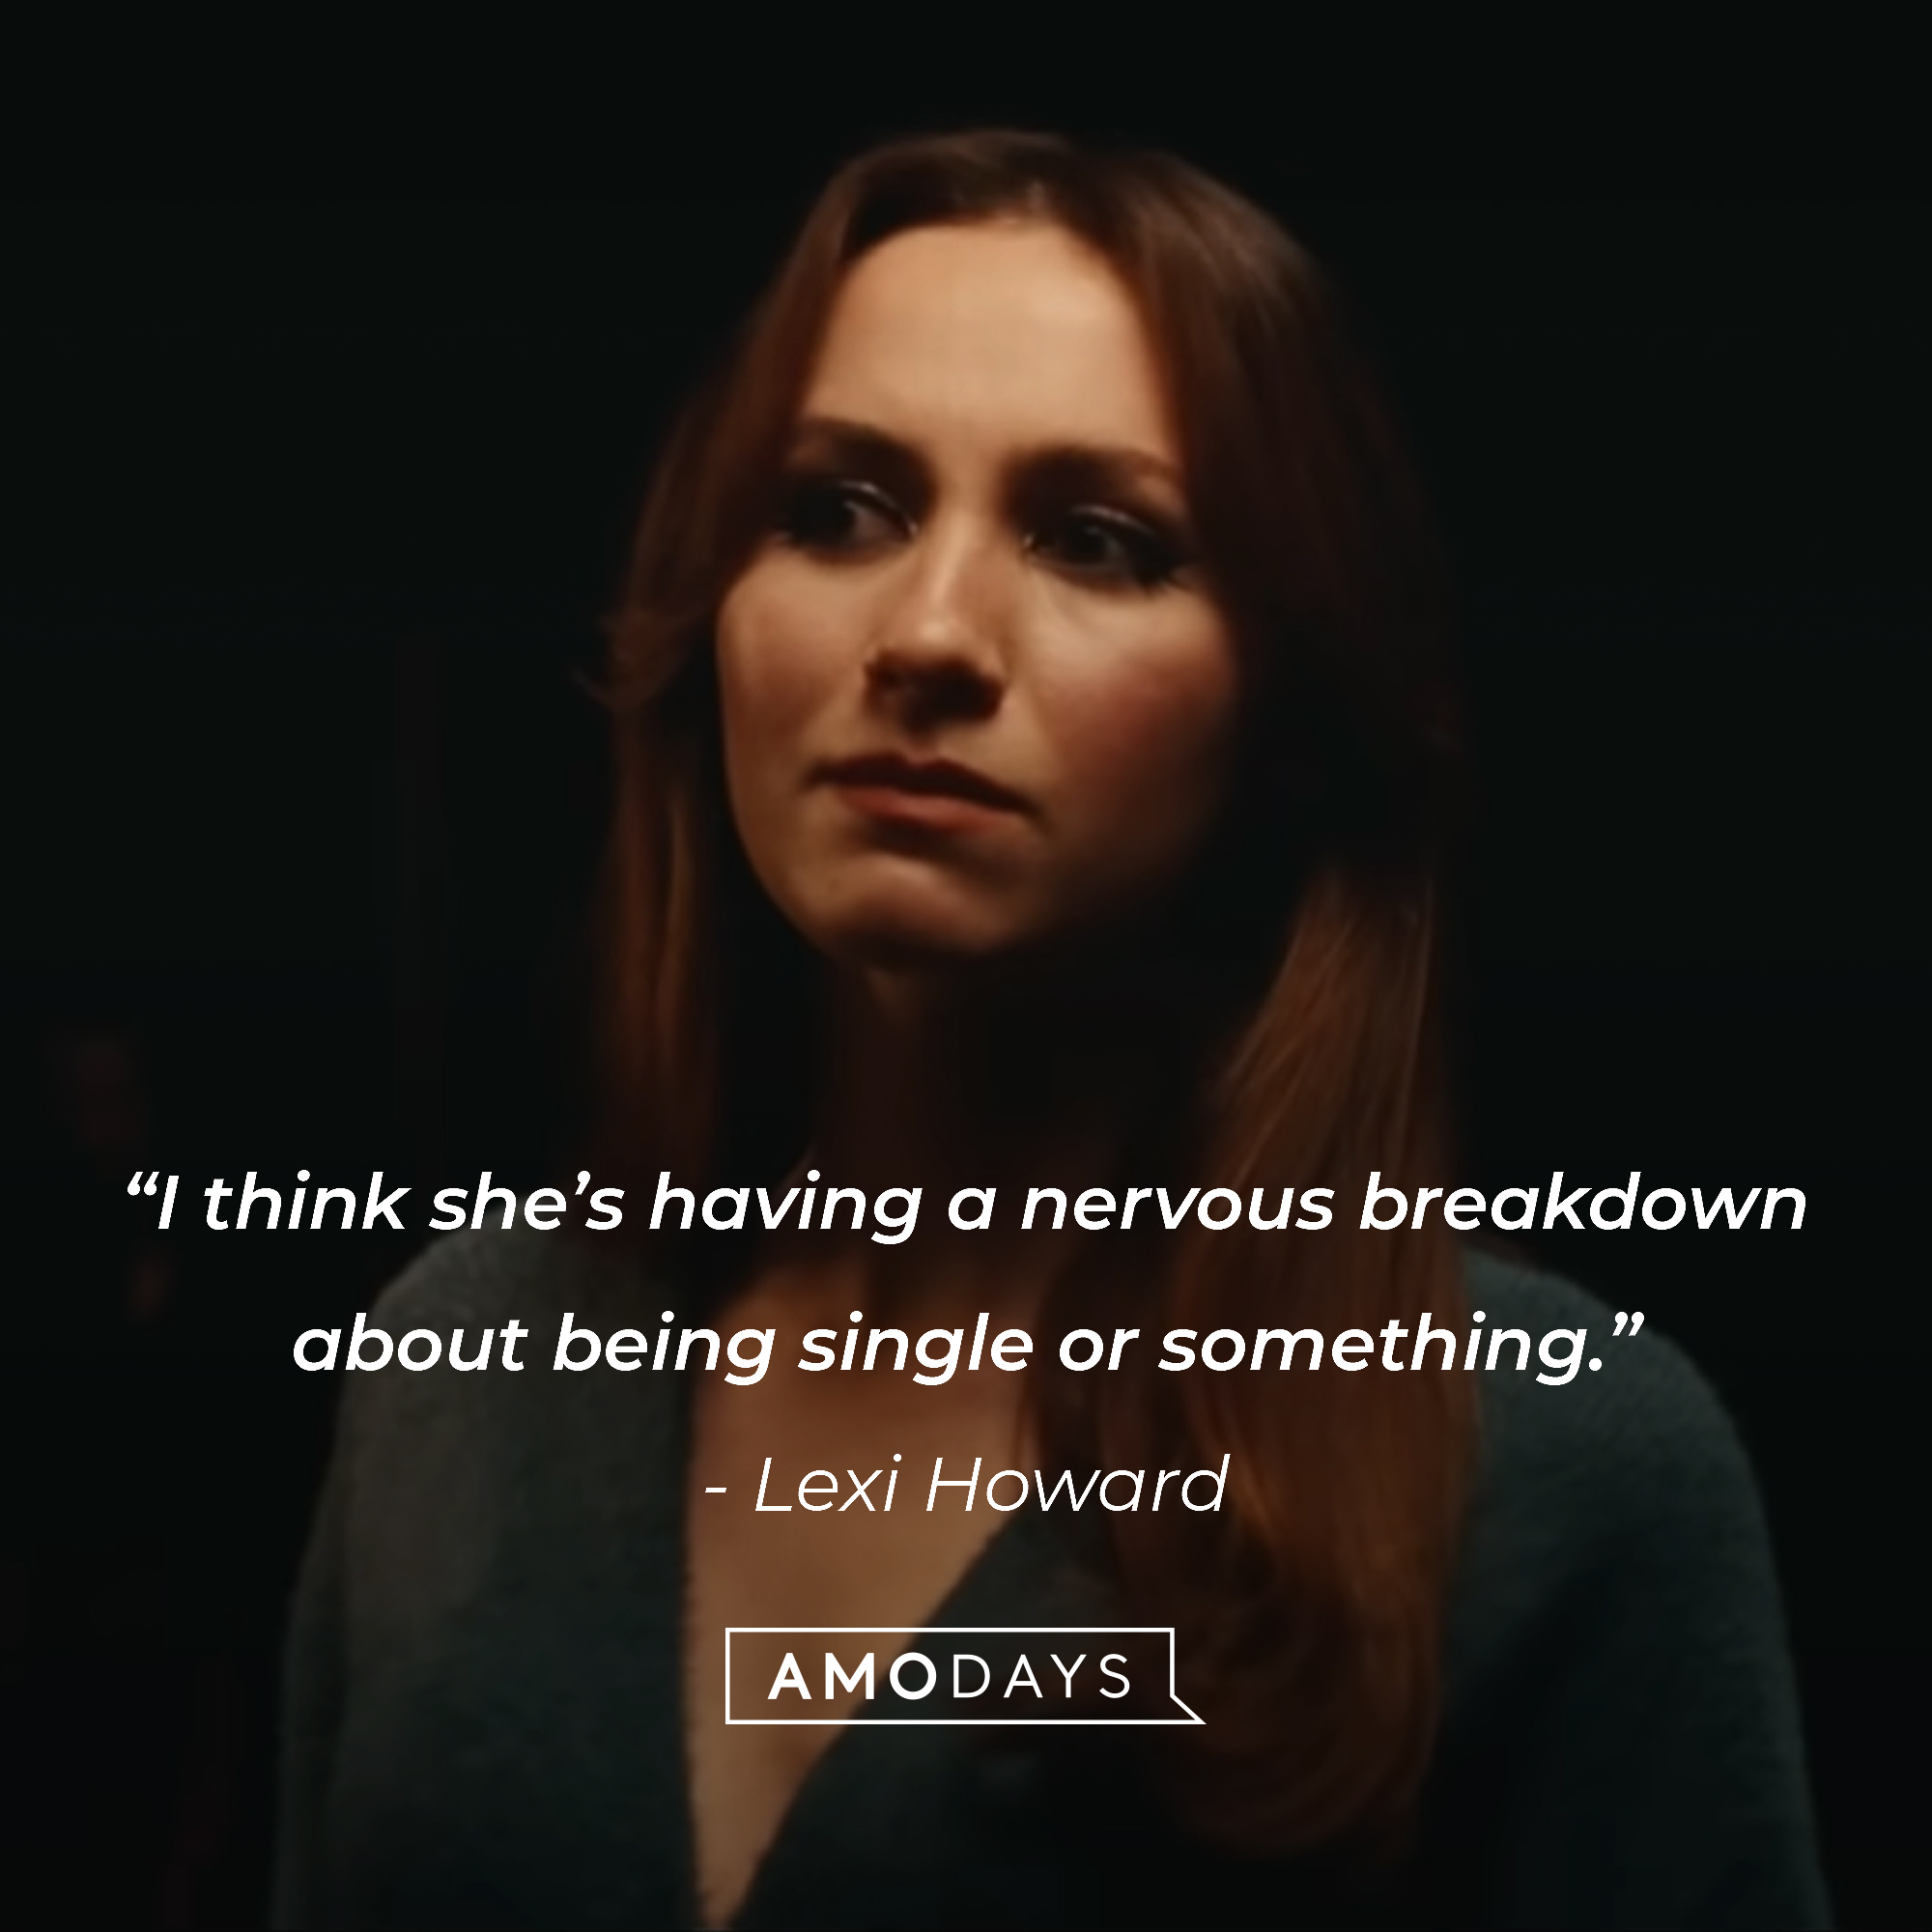 An image of Lexi Howard, with her quote: “I think she’s having a nervous breakdown about being single or something.”  | Source: HBO